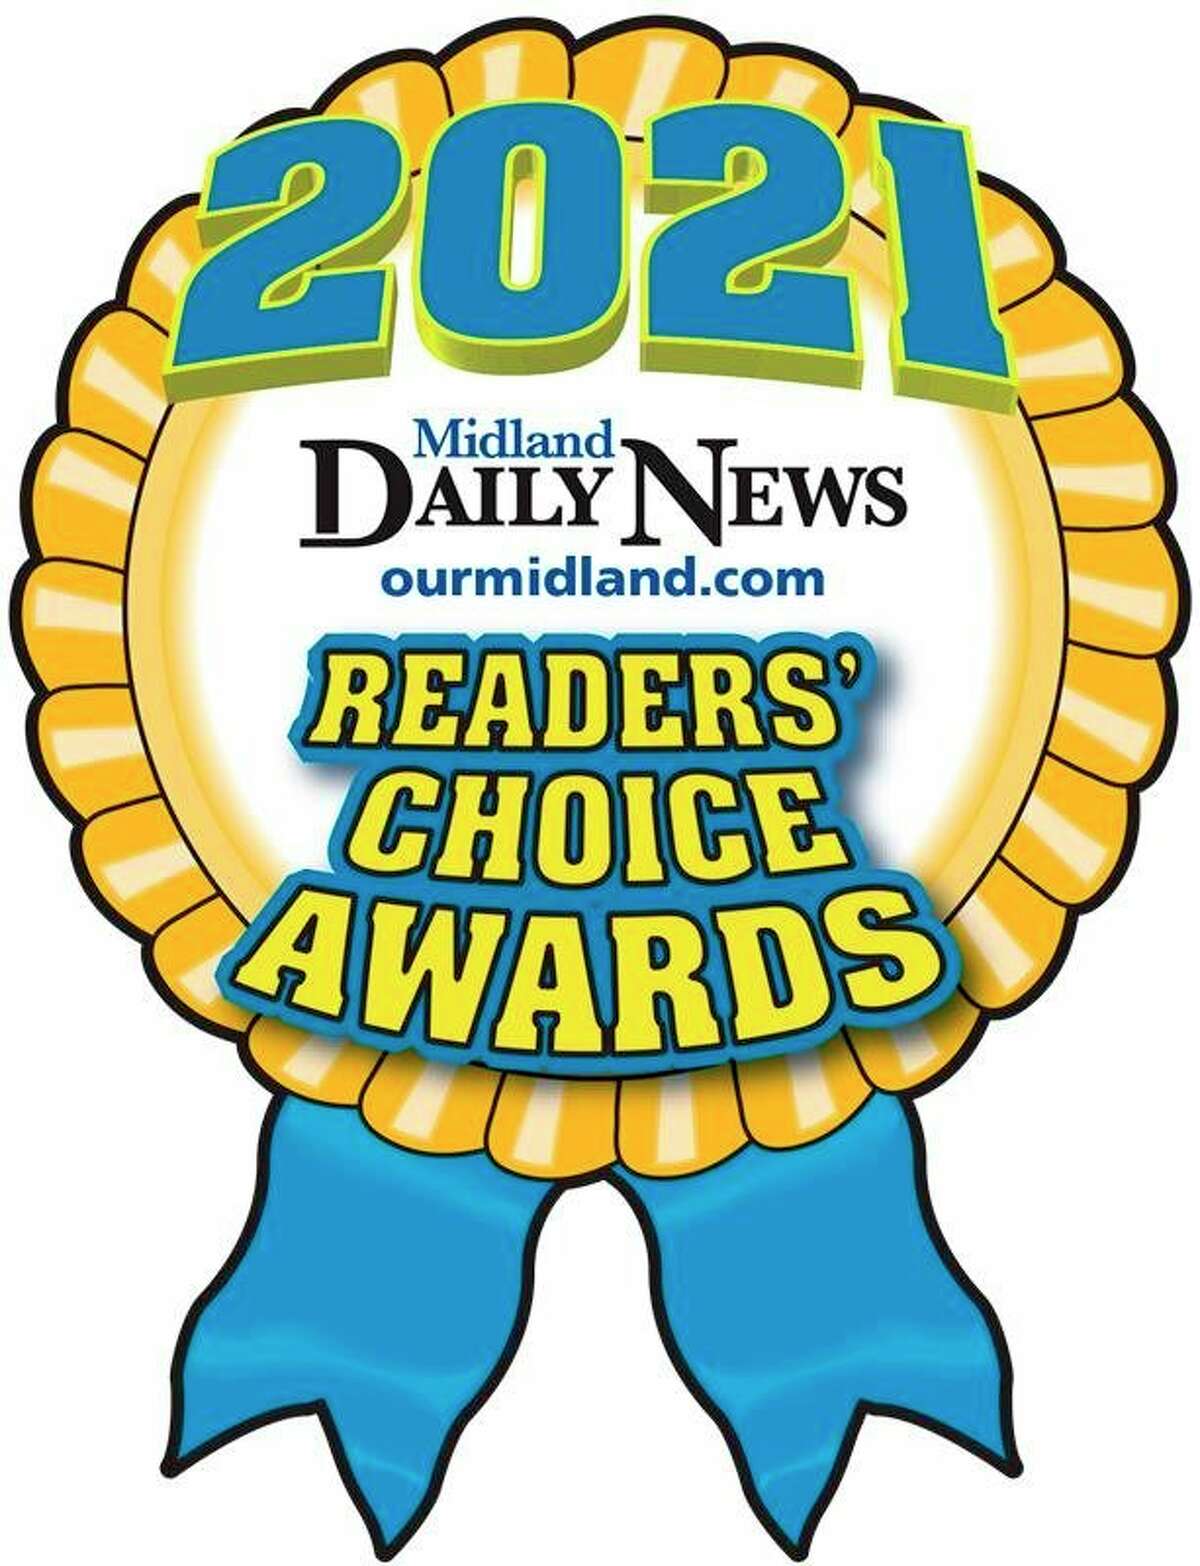 Daily News’ Readers' Choice contest to feature a Mackinac Island